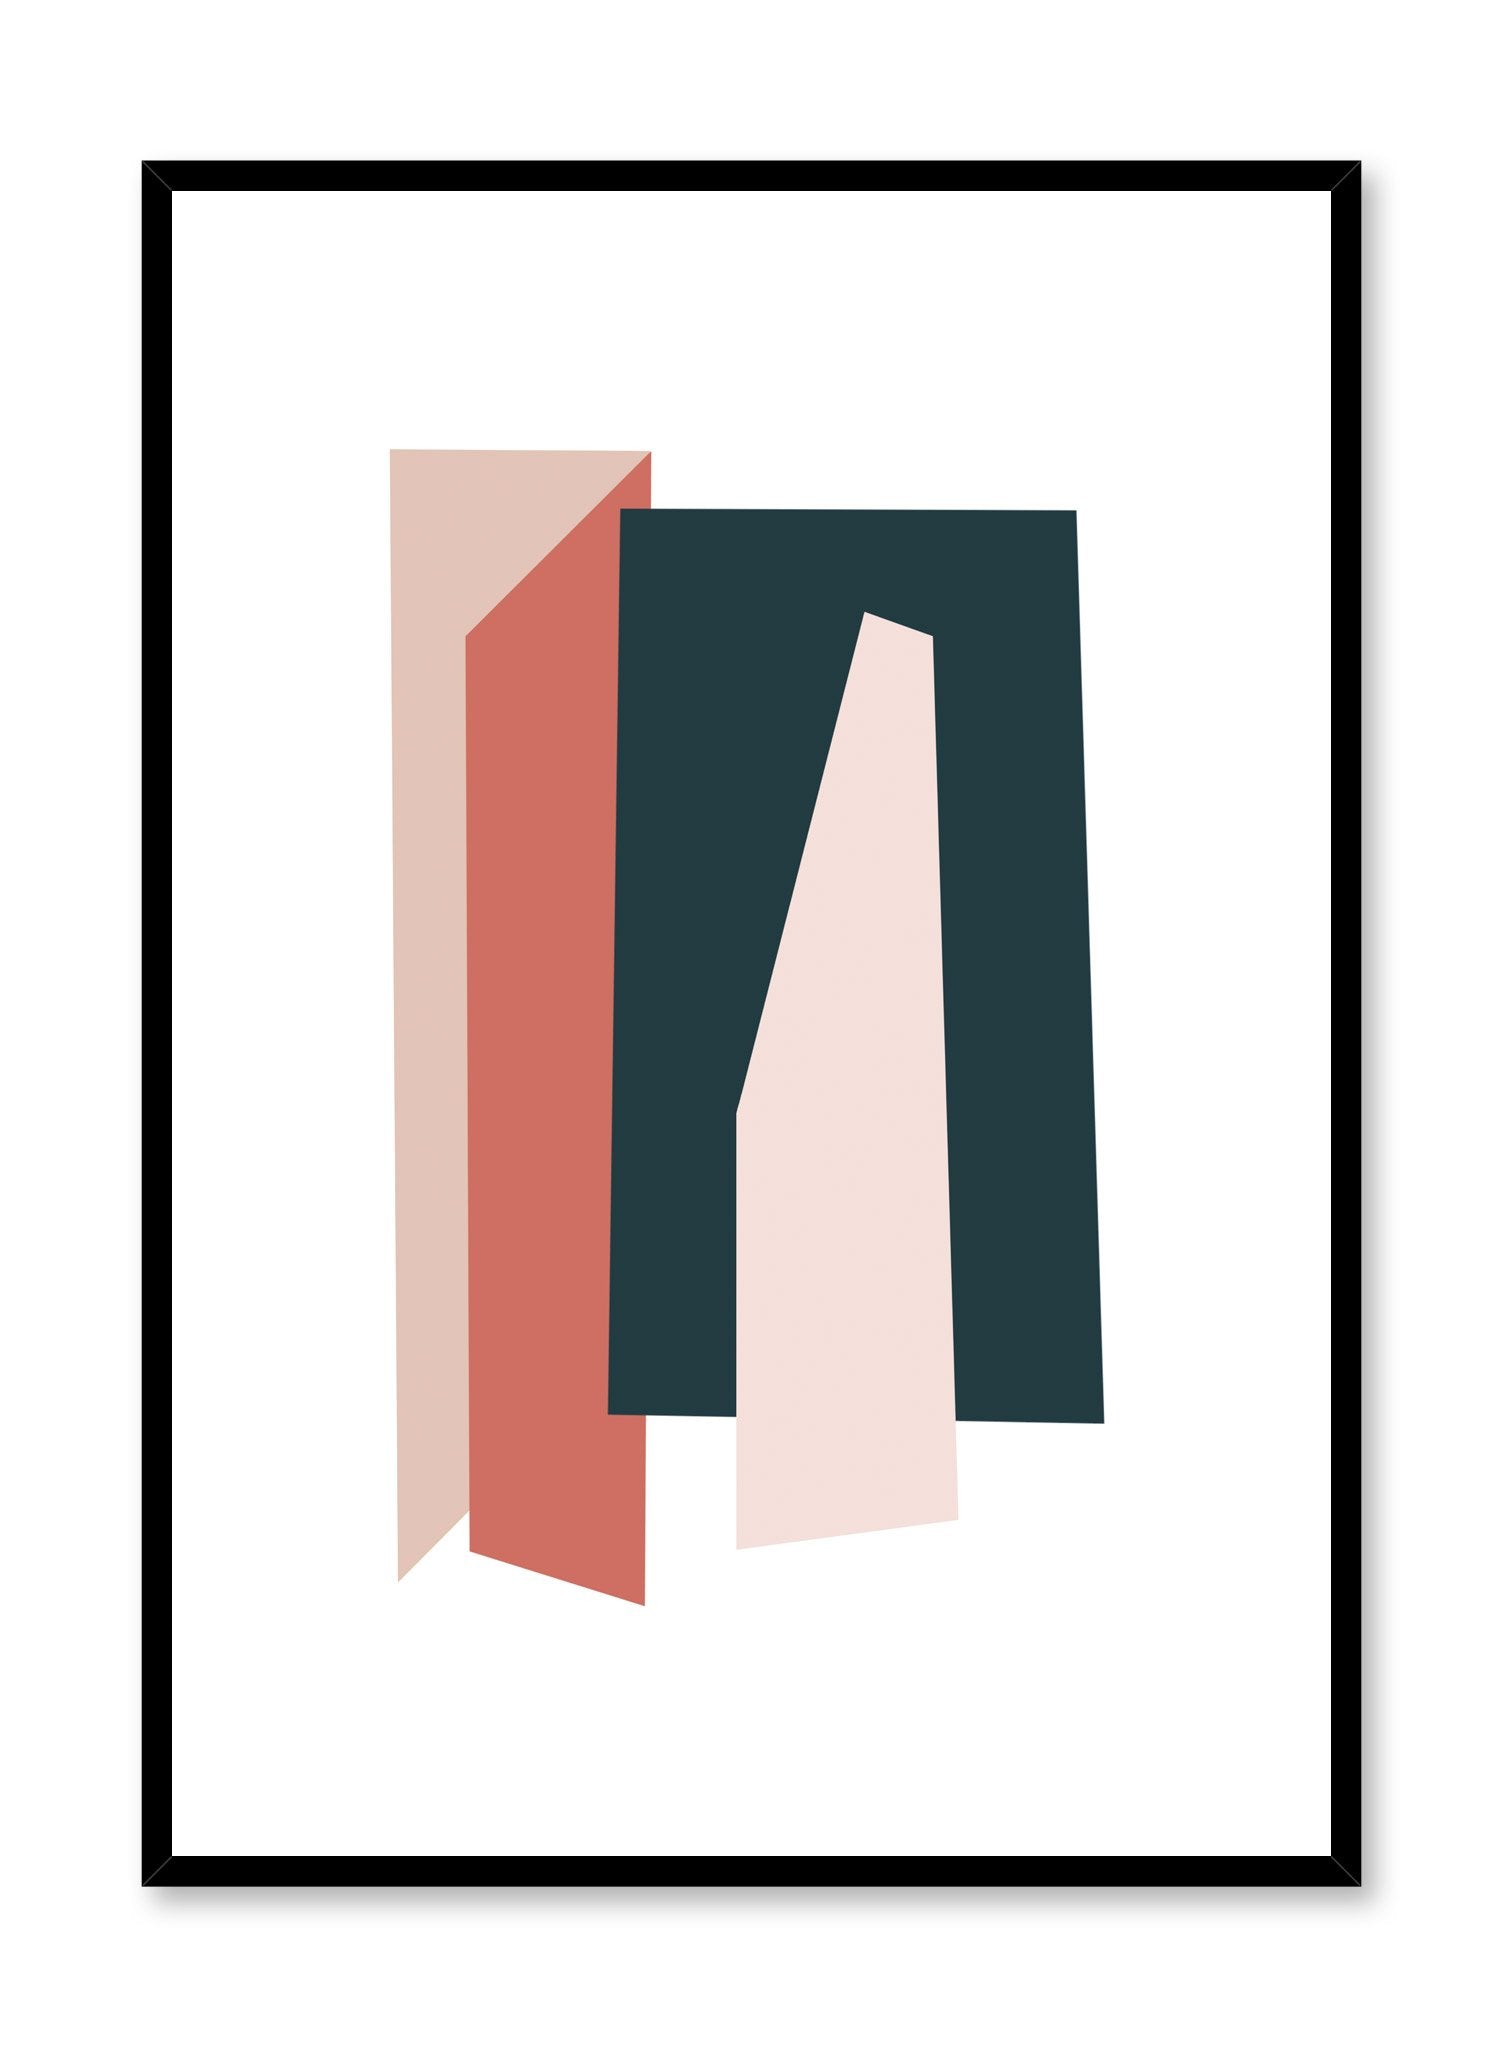 Modern minimalist poster by Opposite Wall with abstract colour shapes